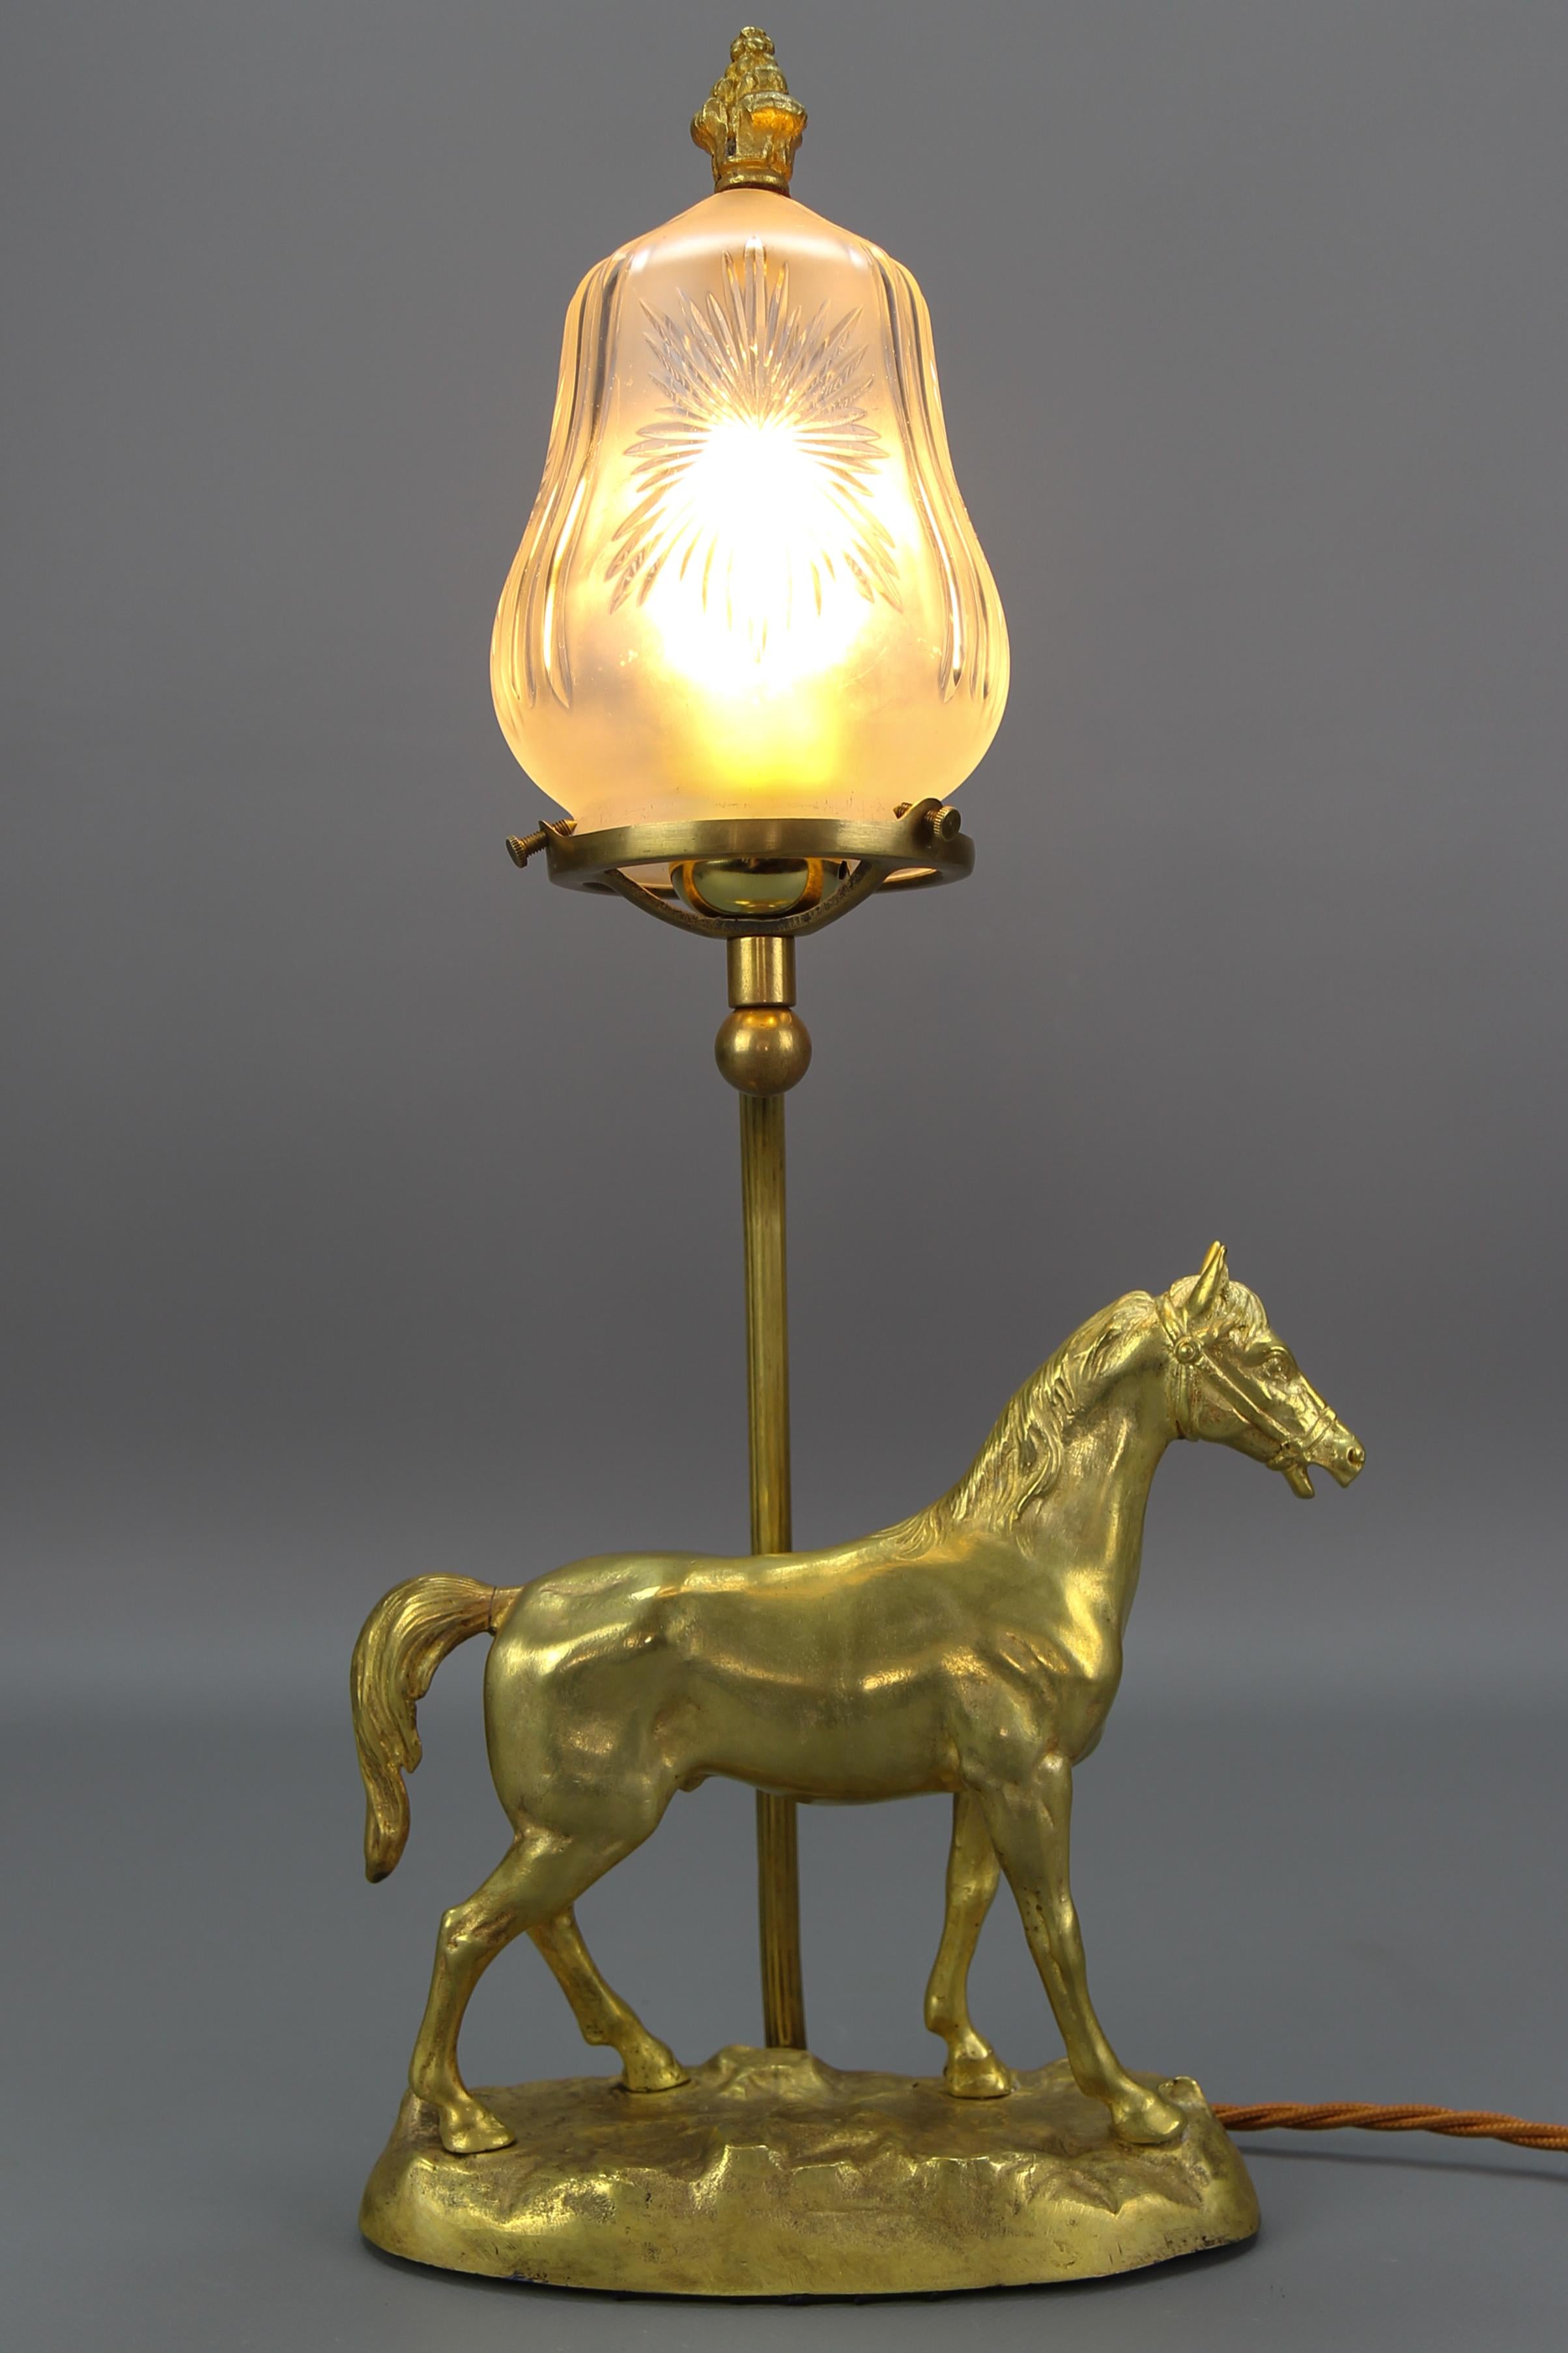 French bronze and cut frosted glass table lamp with a horse, from circa the 1950s.
A beautiful and heavy French bronze table lamp with a horse figure from the middle of the 20th century. This stunning Hollywood Regency-style table lamp features an